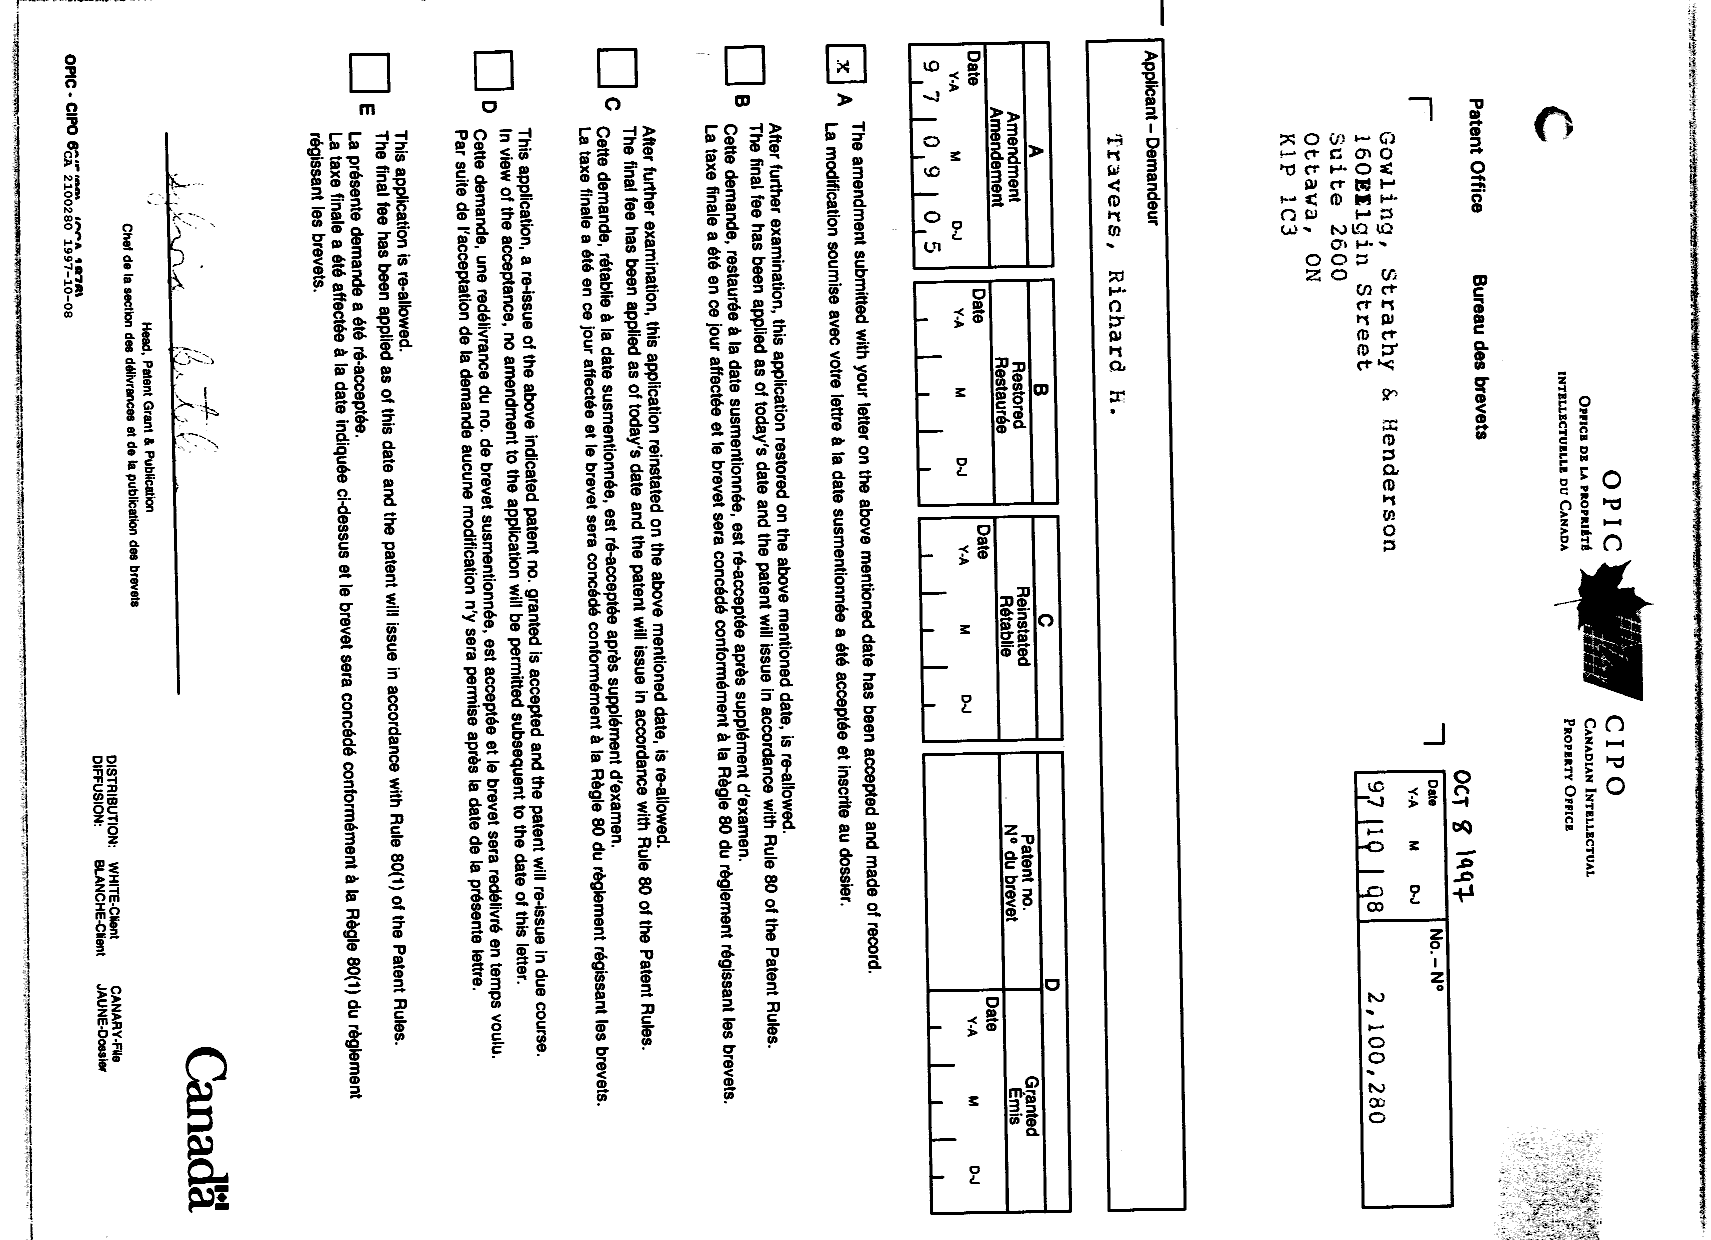 Canadian Patent Document 2100280. Office Letter 19971008. Image 1 of 1